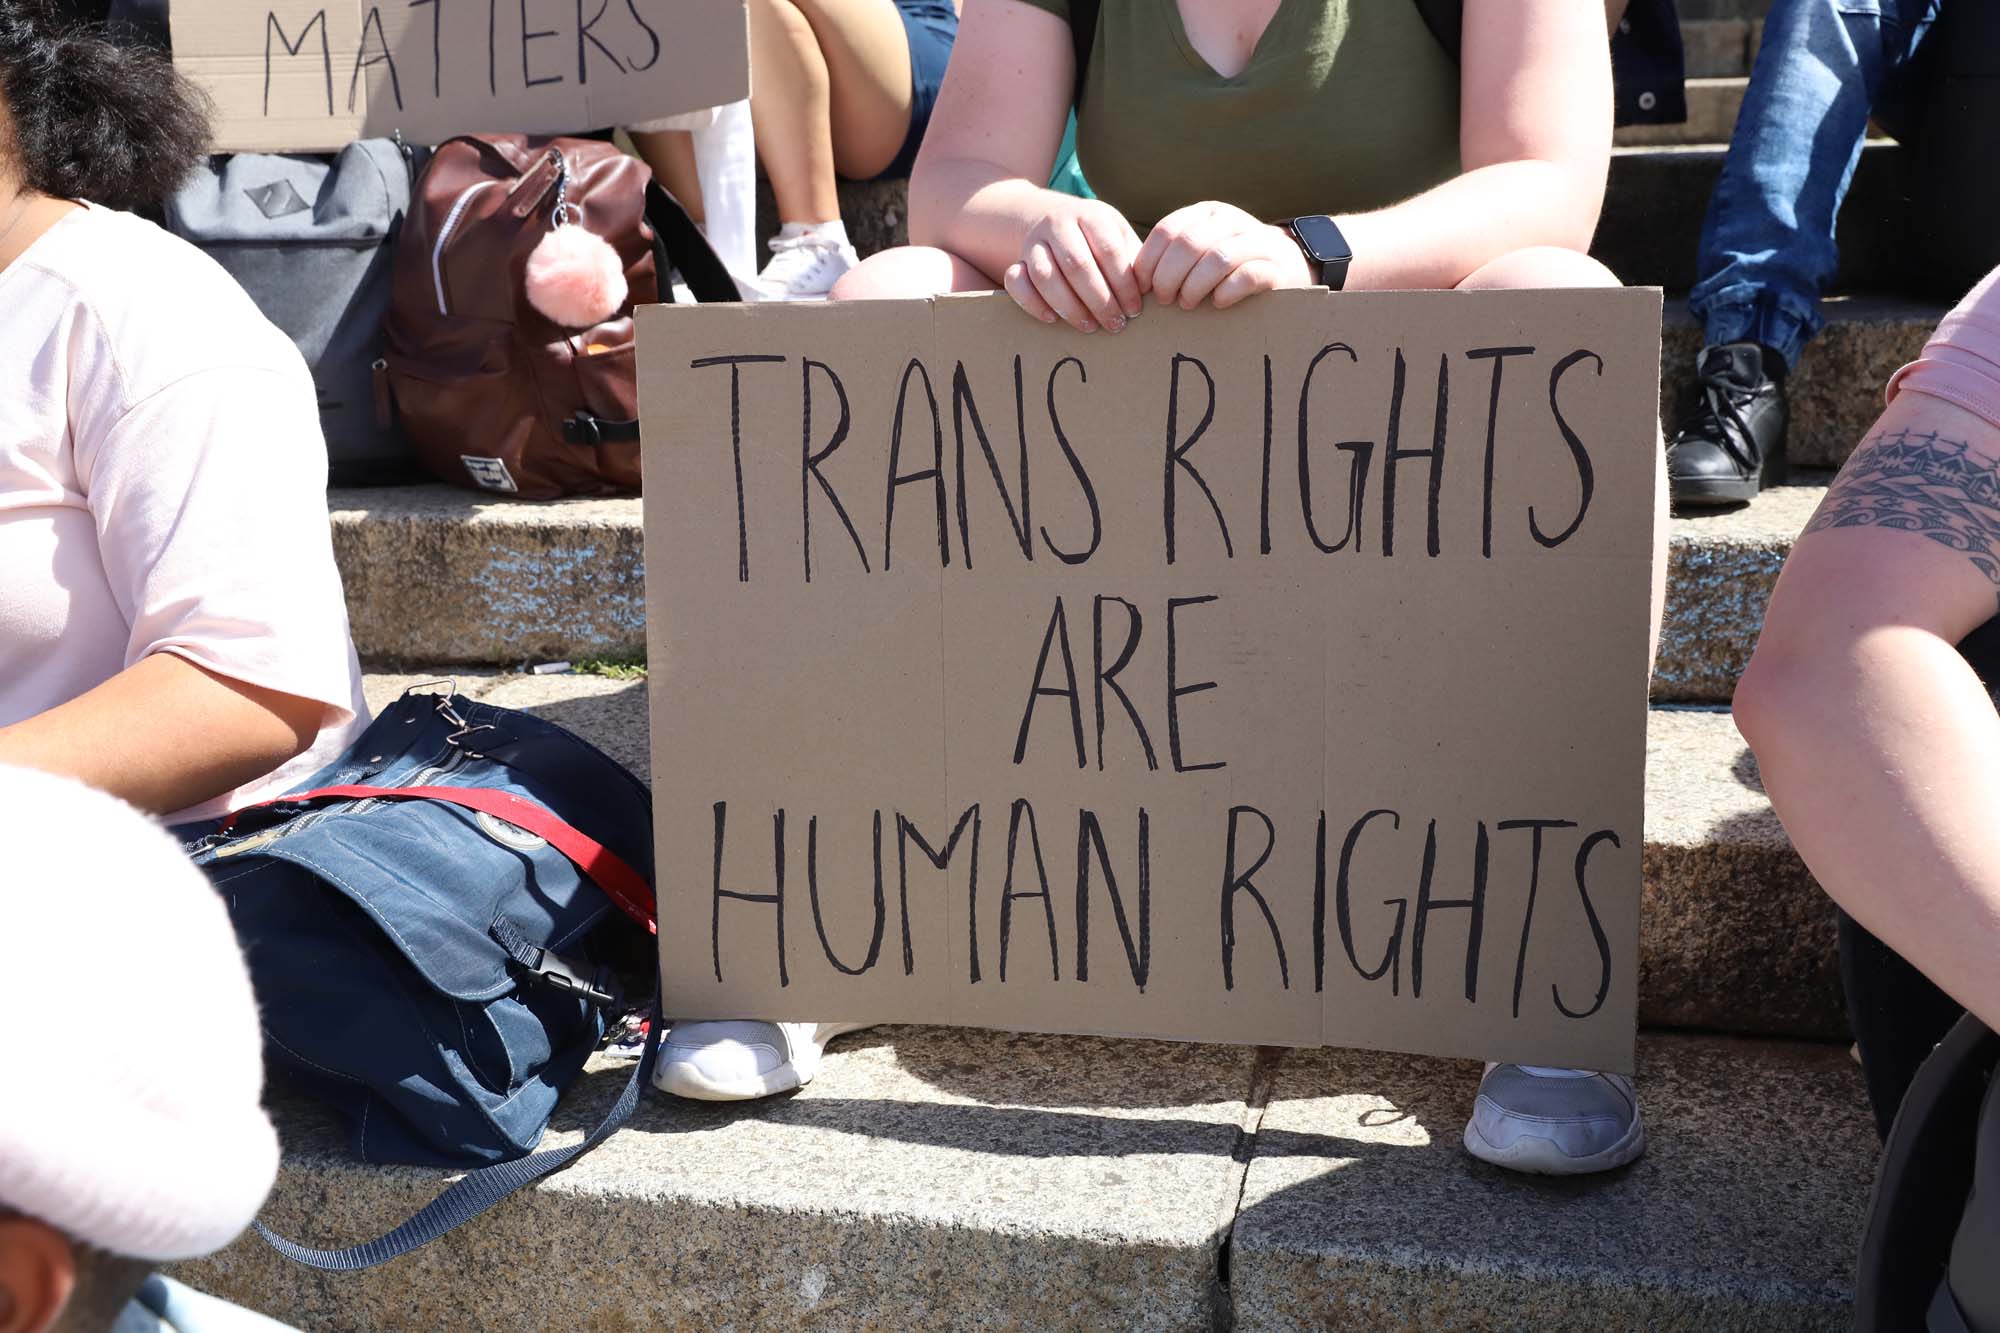 The Rainbow UCT march in solidarity with the trans community highlighted issues surrounding stock shortages of Depo-Testosterone, a hormone replacement therapy used by transgender people transitioning from female to male.